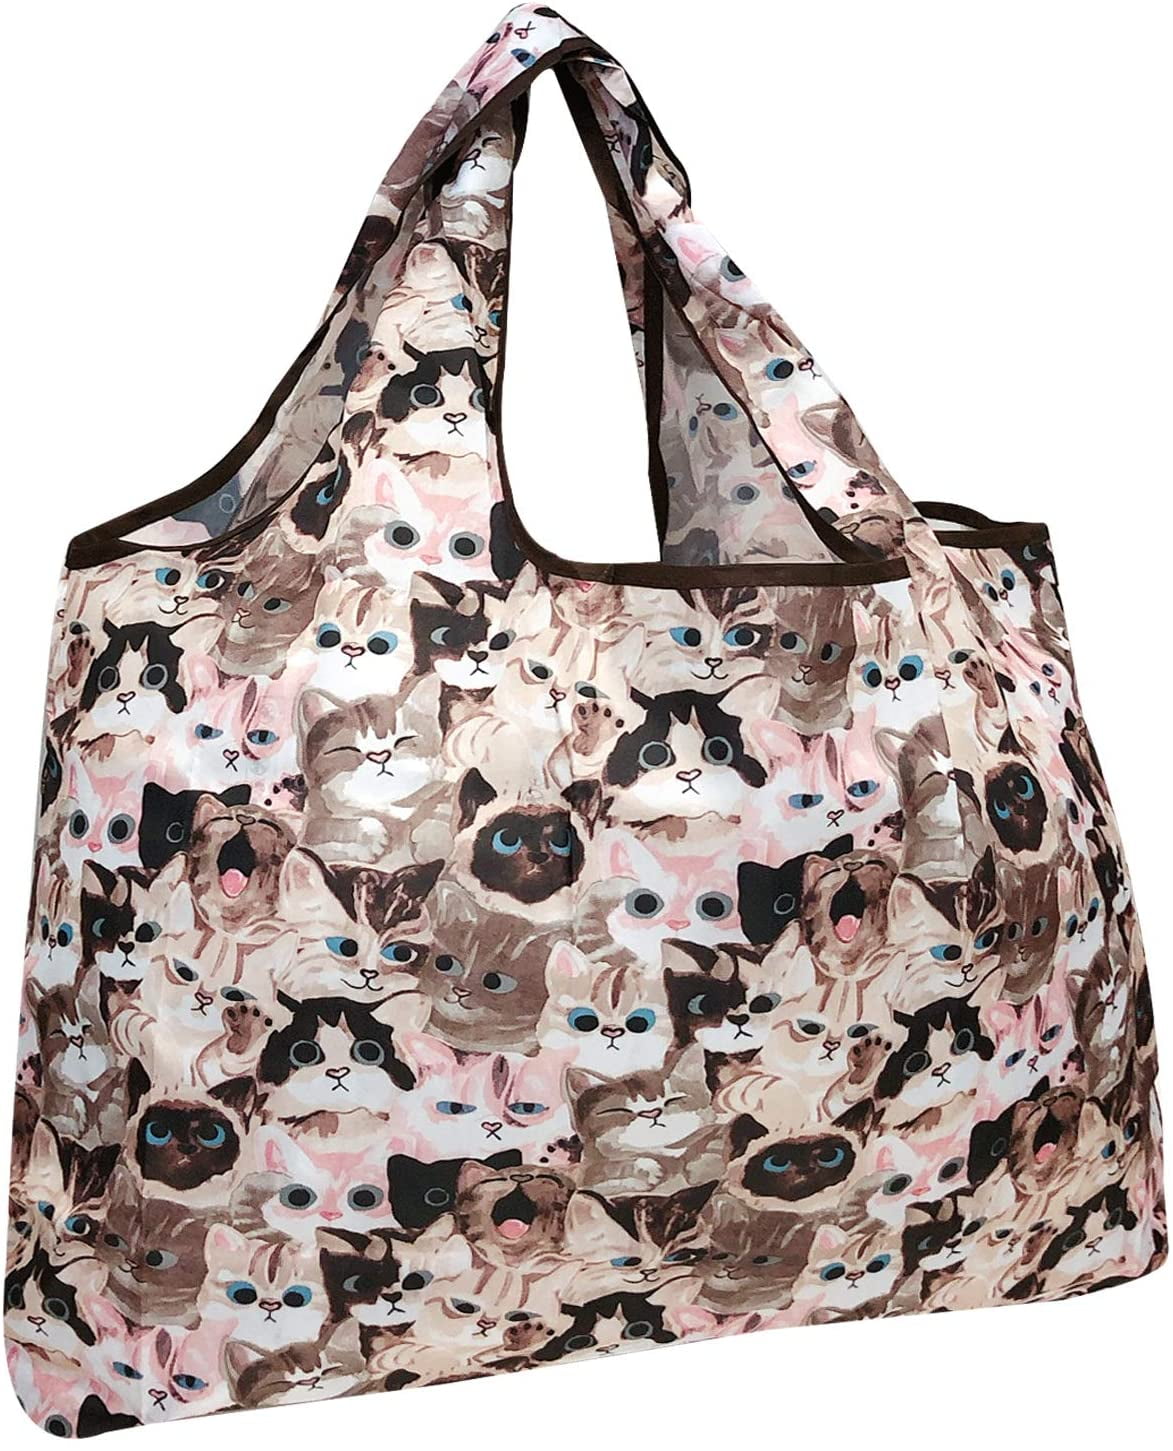 Details about   Wrapables Large Reusable Shopping Tote Bag with Outer Pouch Cherry Blossoms 